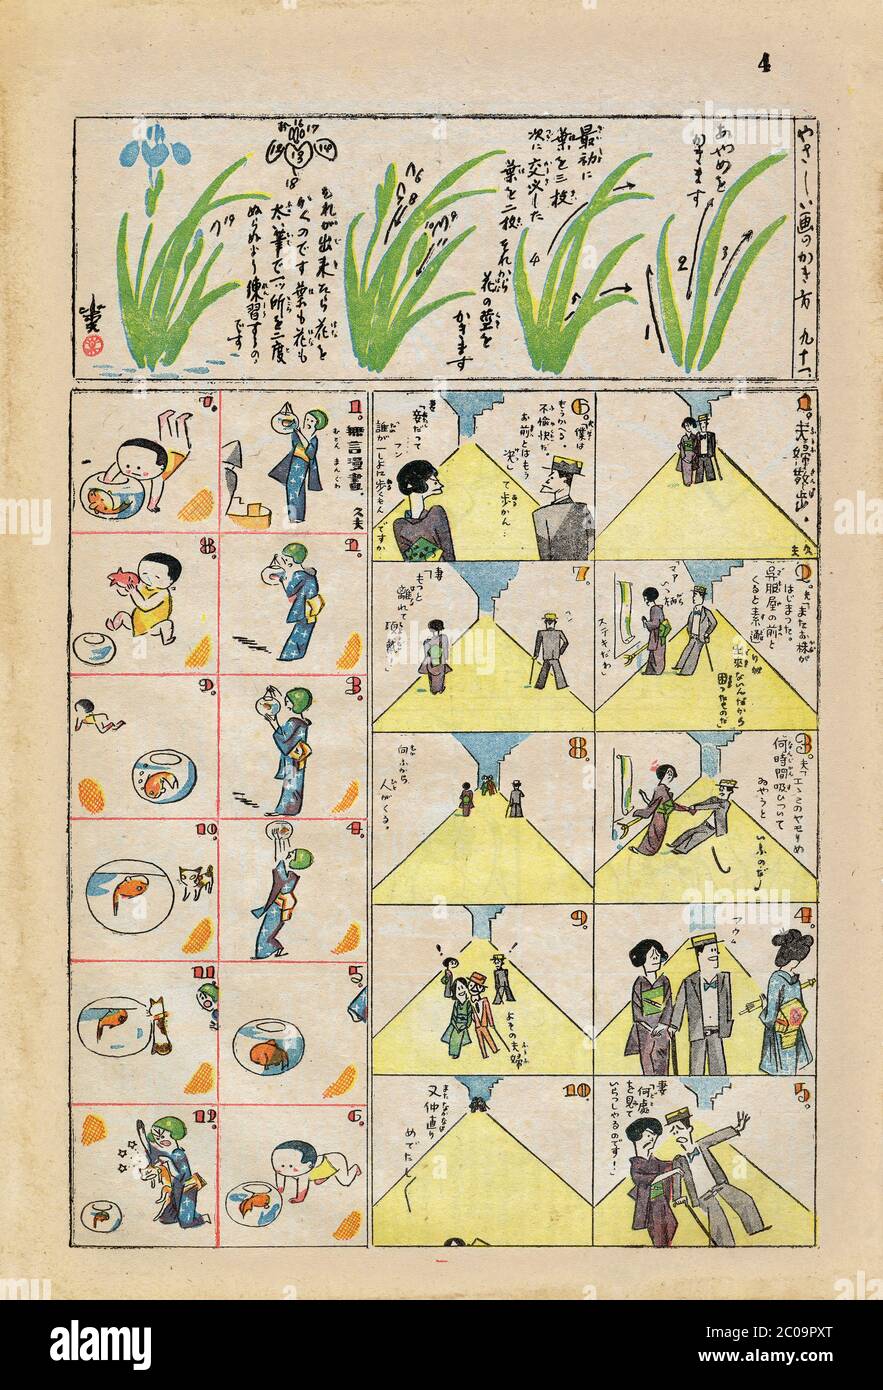 [ 1920s Japan - Jiji Manga Comics 267 ] — Jiji Manga (時事漫画), a comics supplement developed by famed Japanese artist Kitazawa Rakuten (北澤 保次, 1876–1955), often called the 'father of manga'. Issue 267 of June 7, 1926 (Taisho 15).  Jiji manga was first published by daily newspaper Jiji Shinpo (時事新報) in January 1902 (Meiji 35). It grew into a full-color Sunday supplement in the 1920s. Publication ended in October 1932 (Showa 7).  Color lithograph on paper.   20th century vintage newspaper. Stock Photo